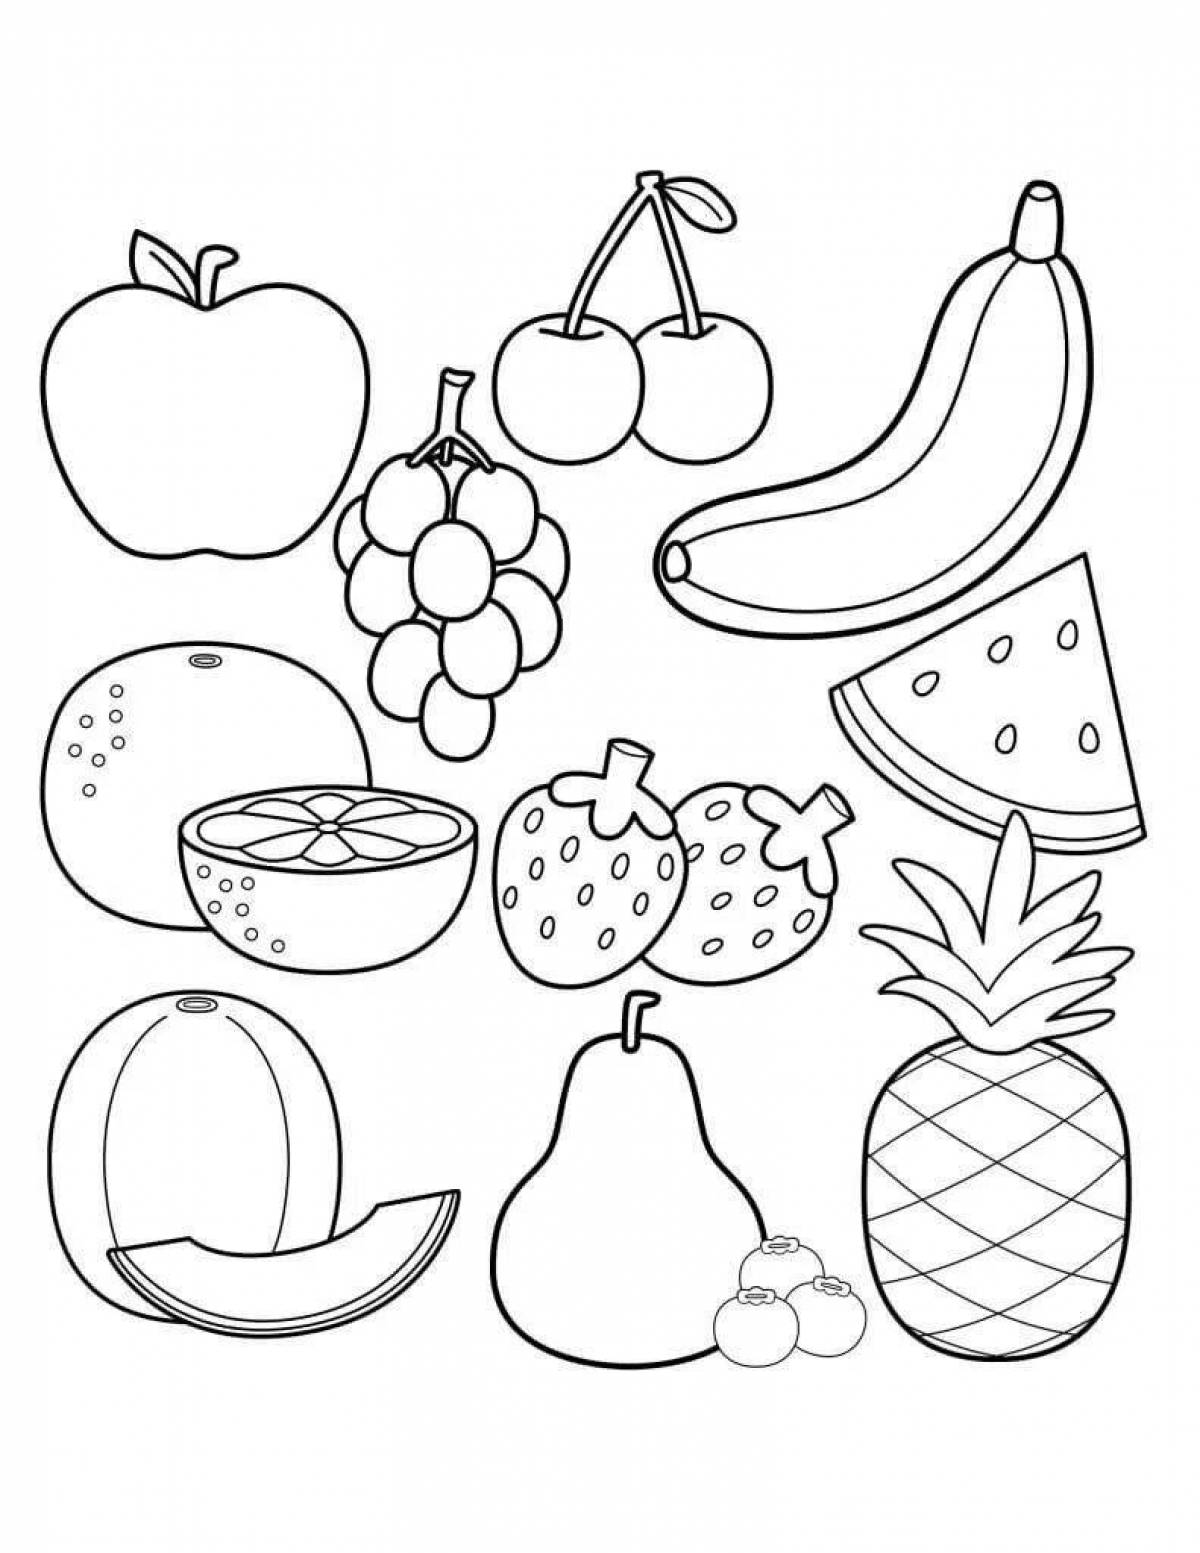 Colorful and joyful fruits and vegetables coloring book